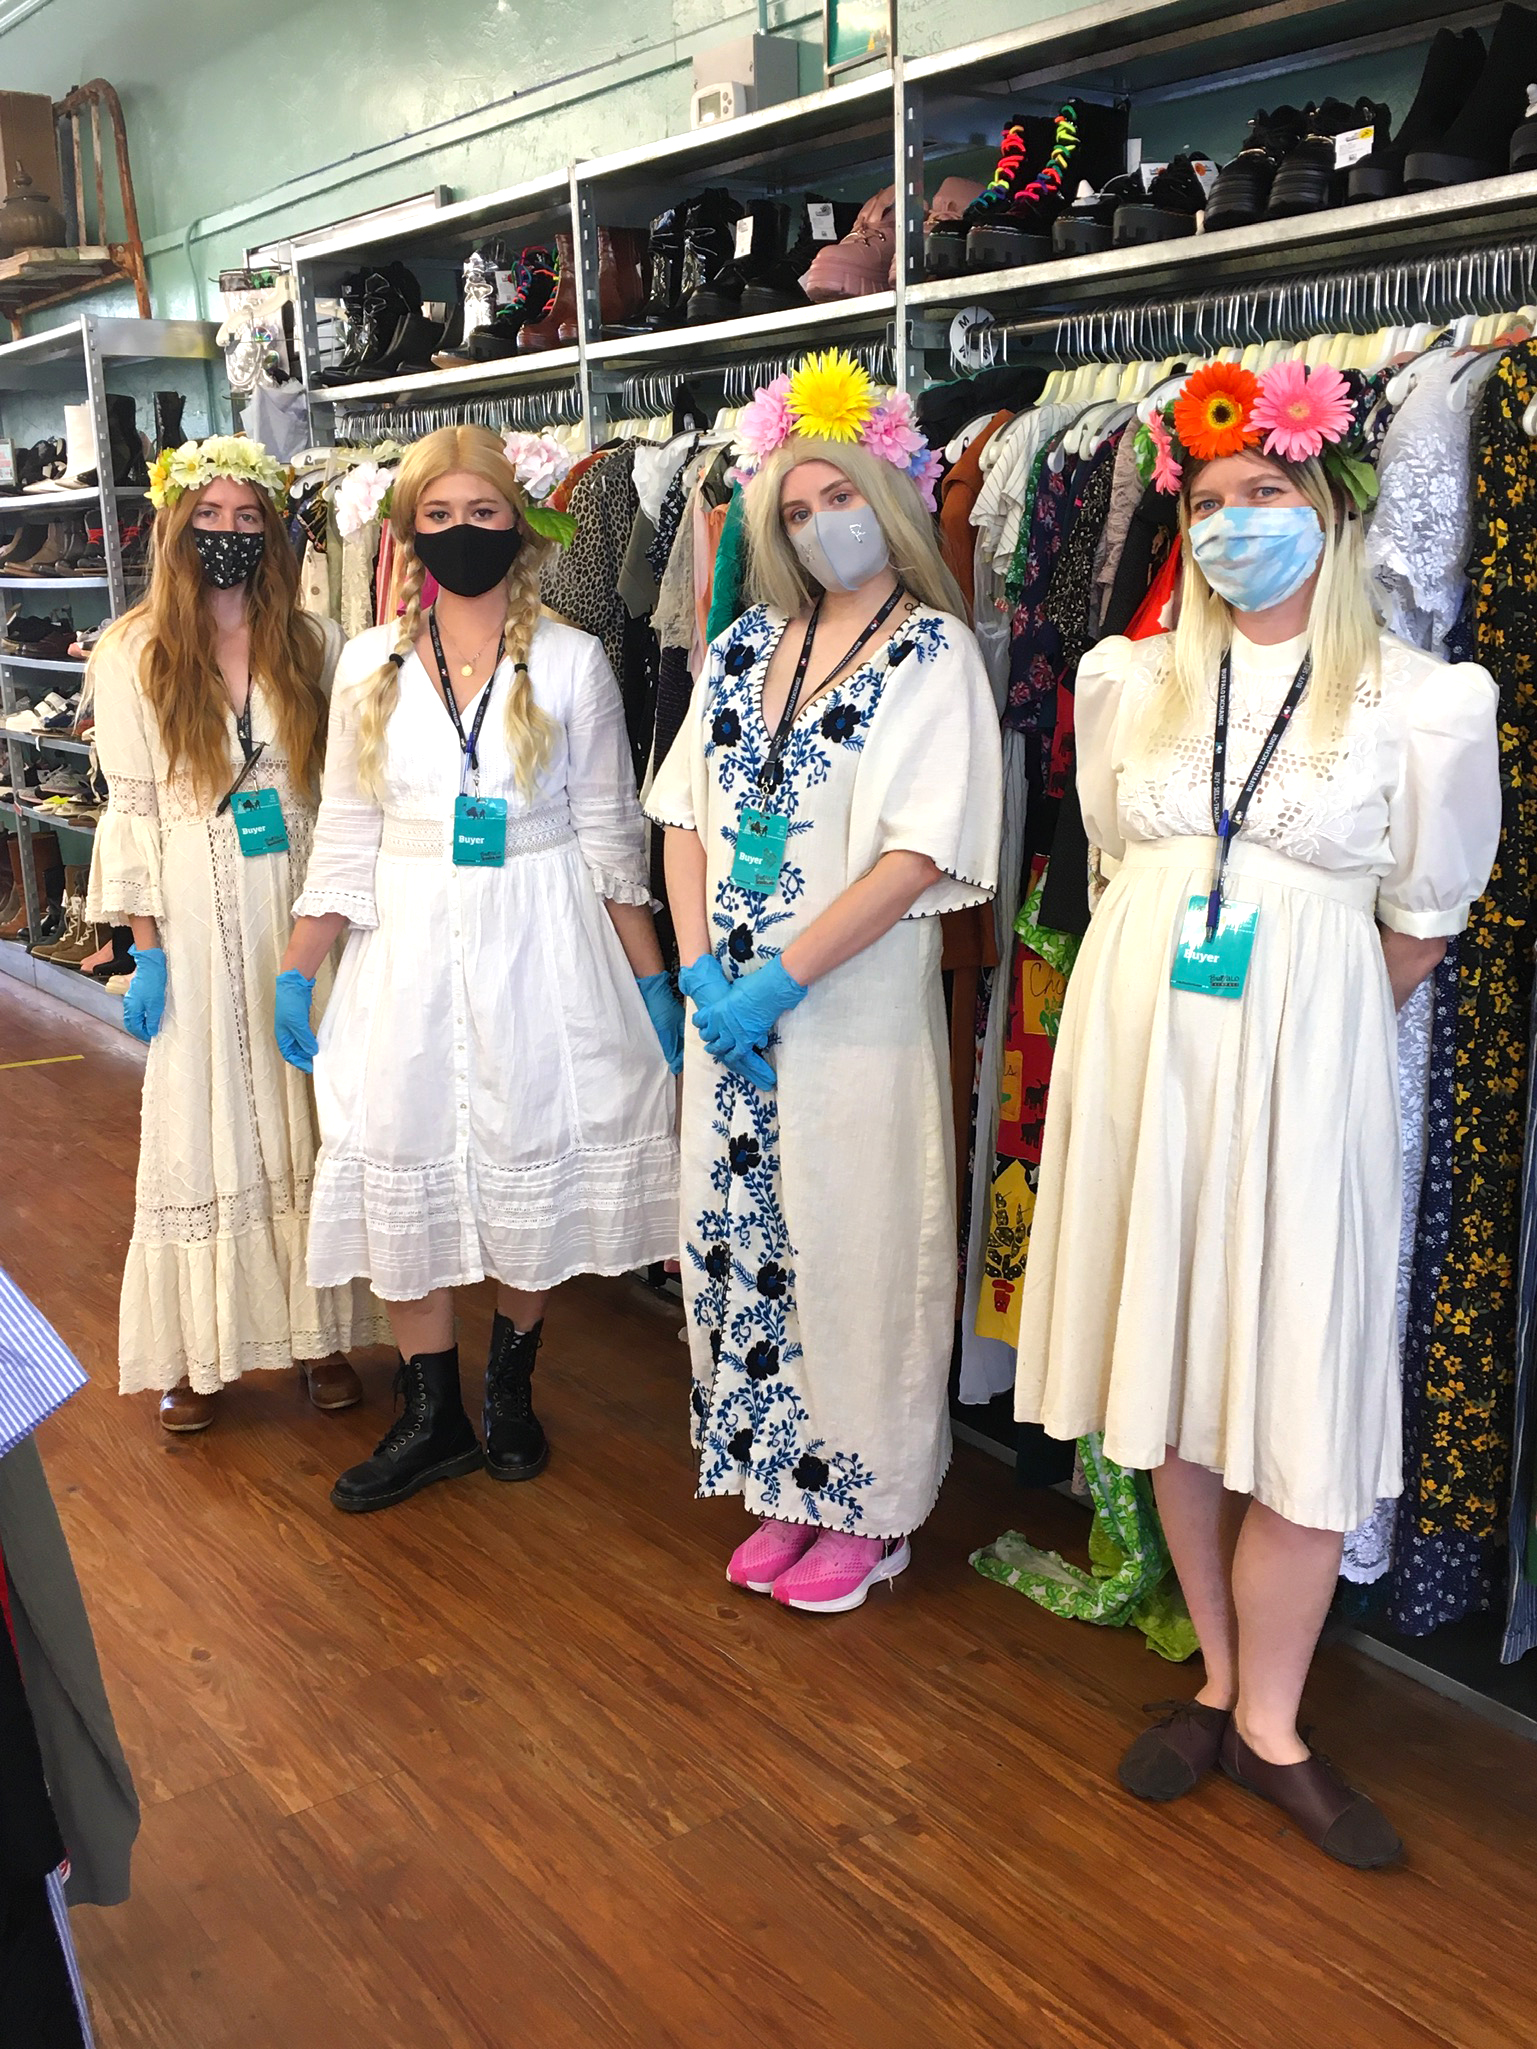 4 Women standing in front of a clothing rack wearing Midsommar costumes